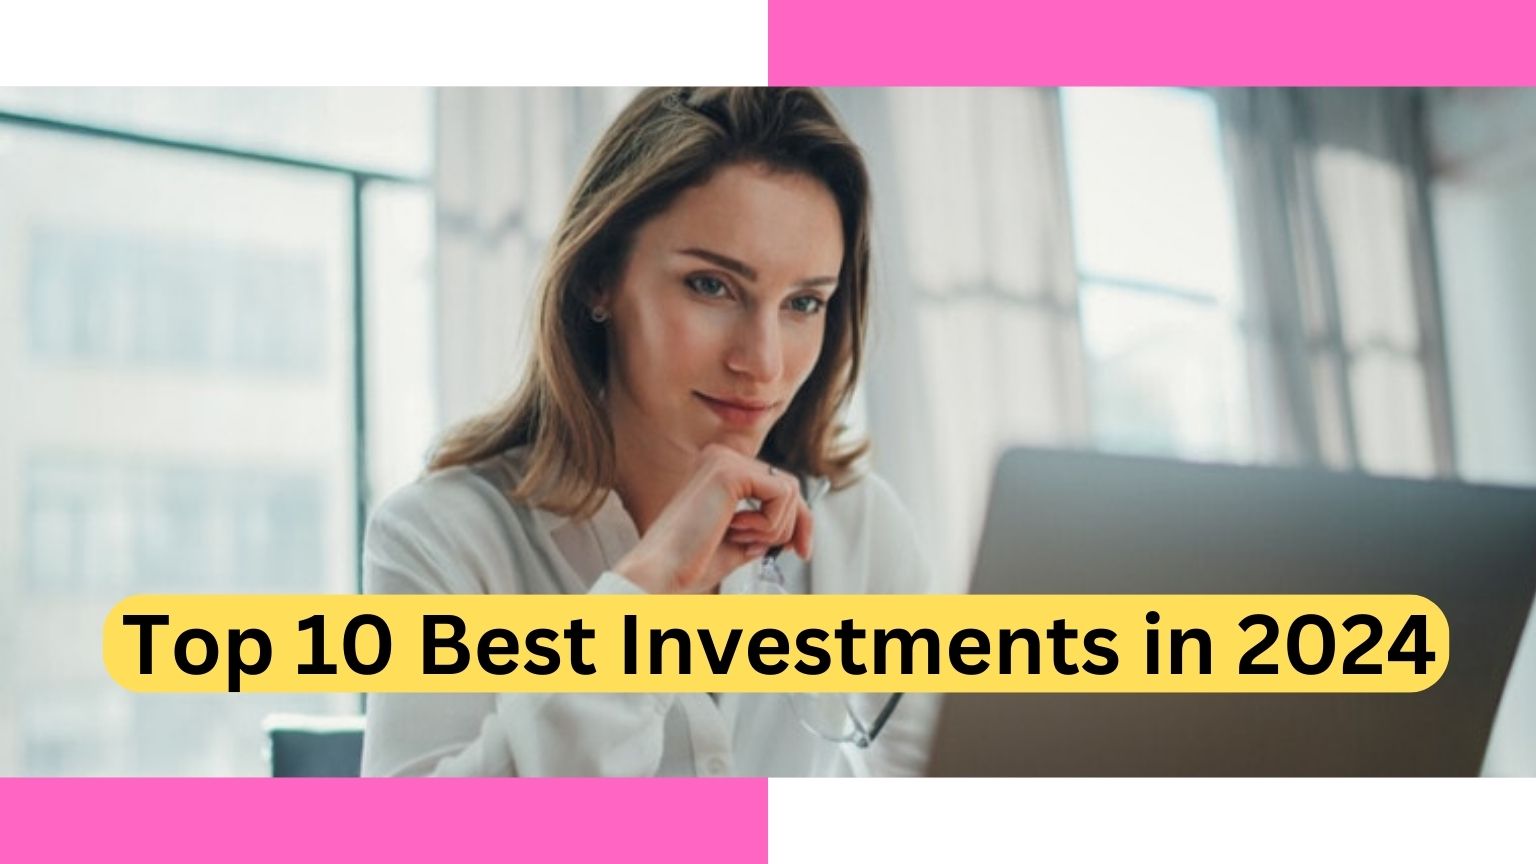 Ultimate Guide to the Top 10 Best Investments in 2024